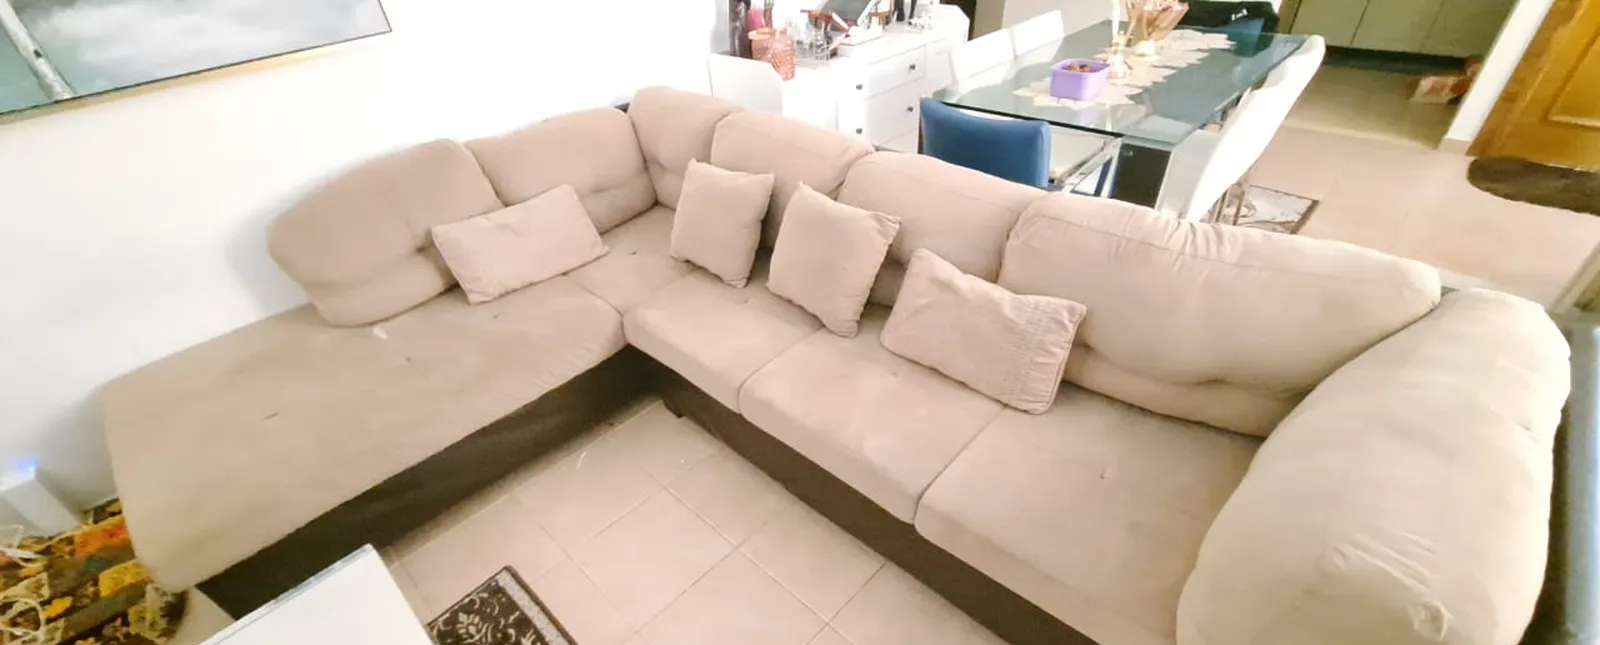 PAN EMIRATES 2 x SINGLE and L Shape 6 Seater Sofa Sets in good condition-pic_2